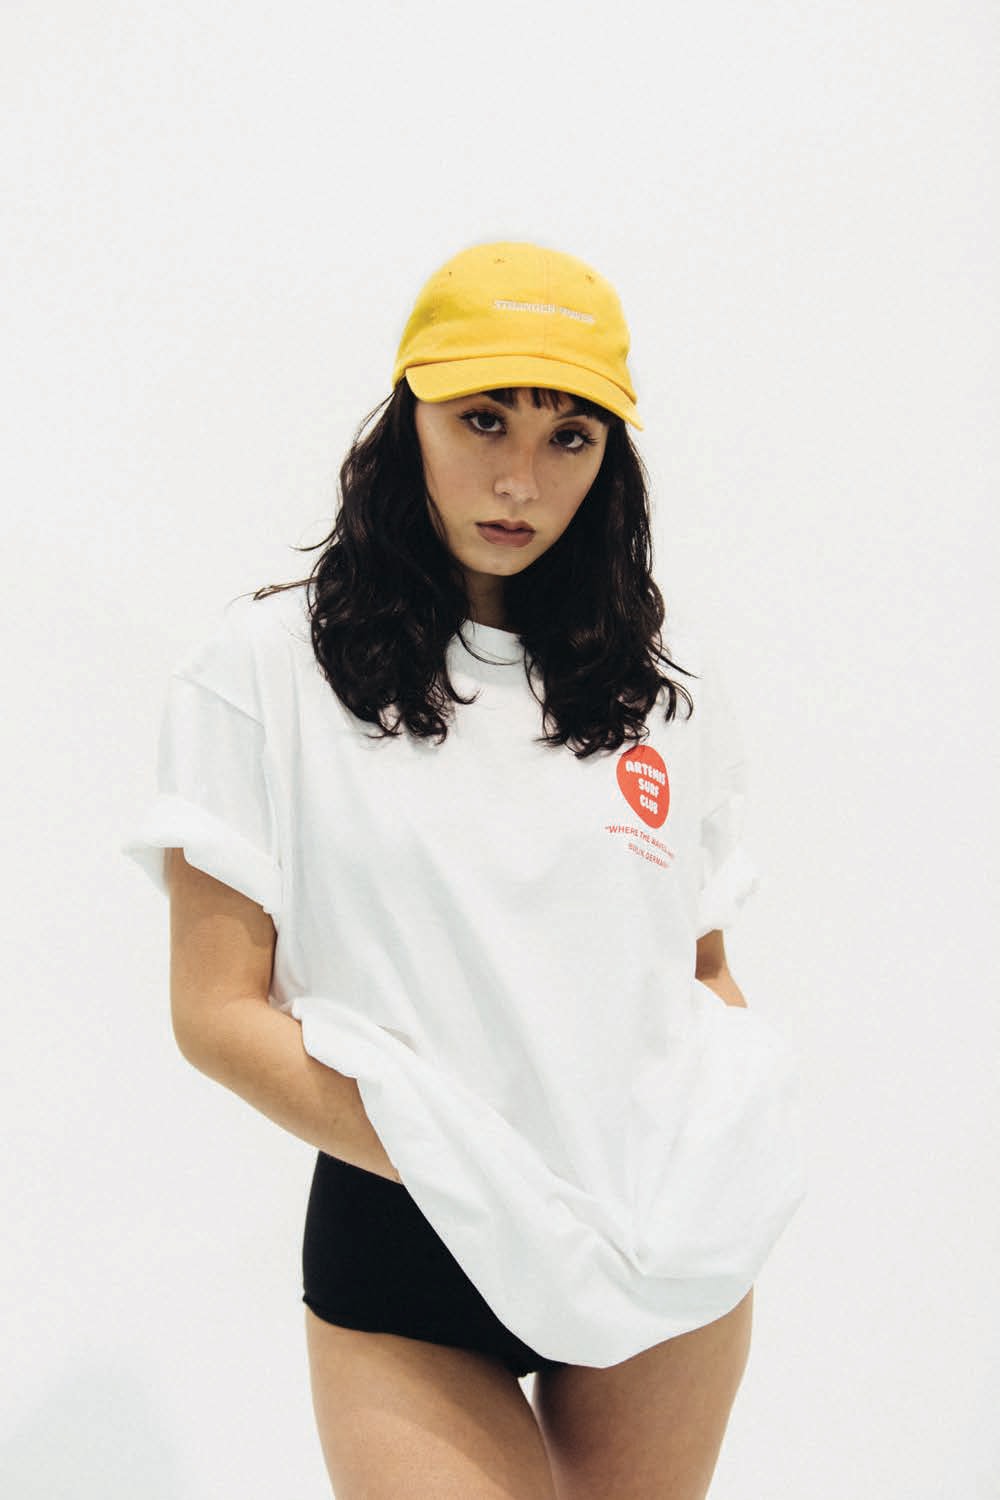 SURF IS DEAD "DROP 2.5" Collection